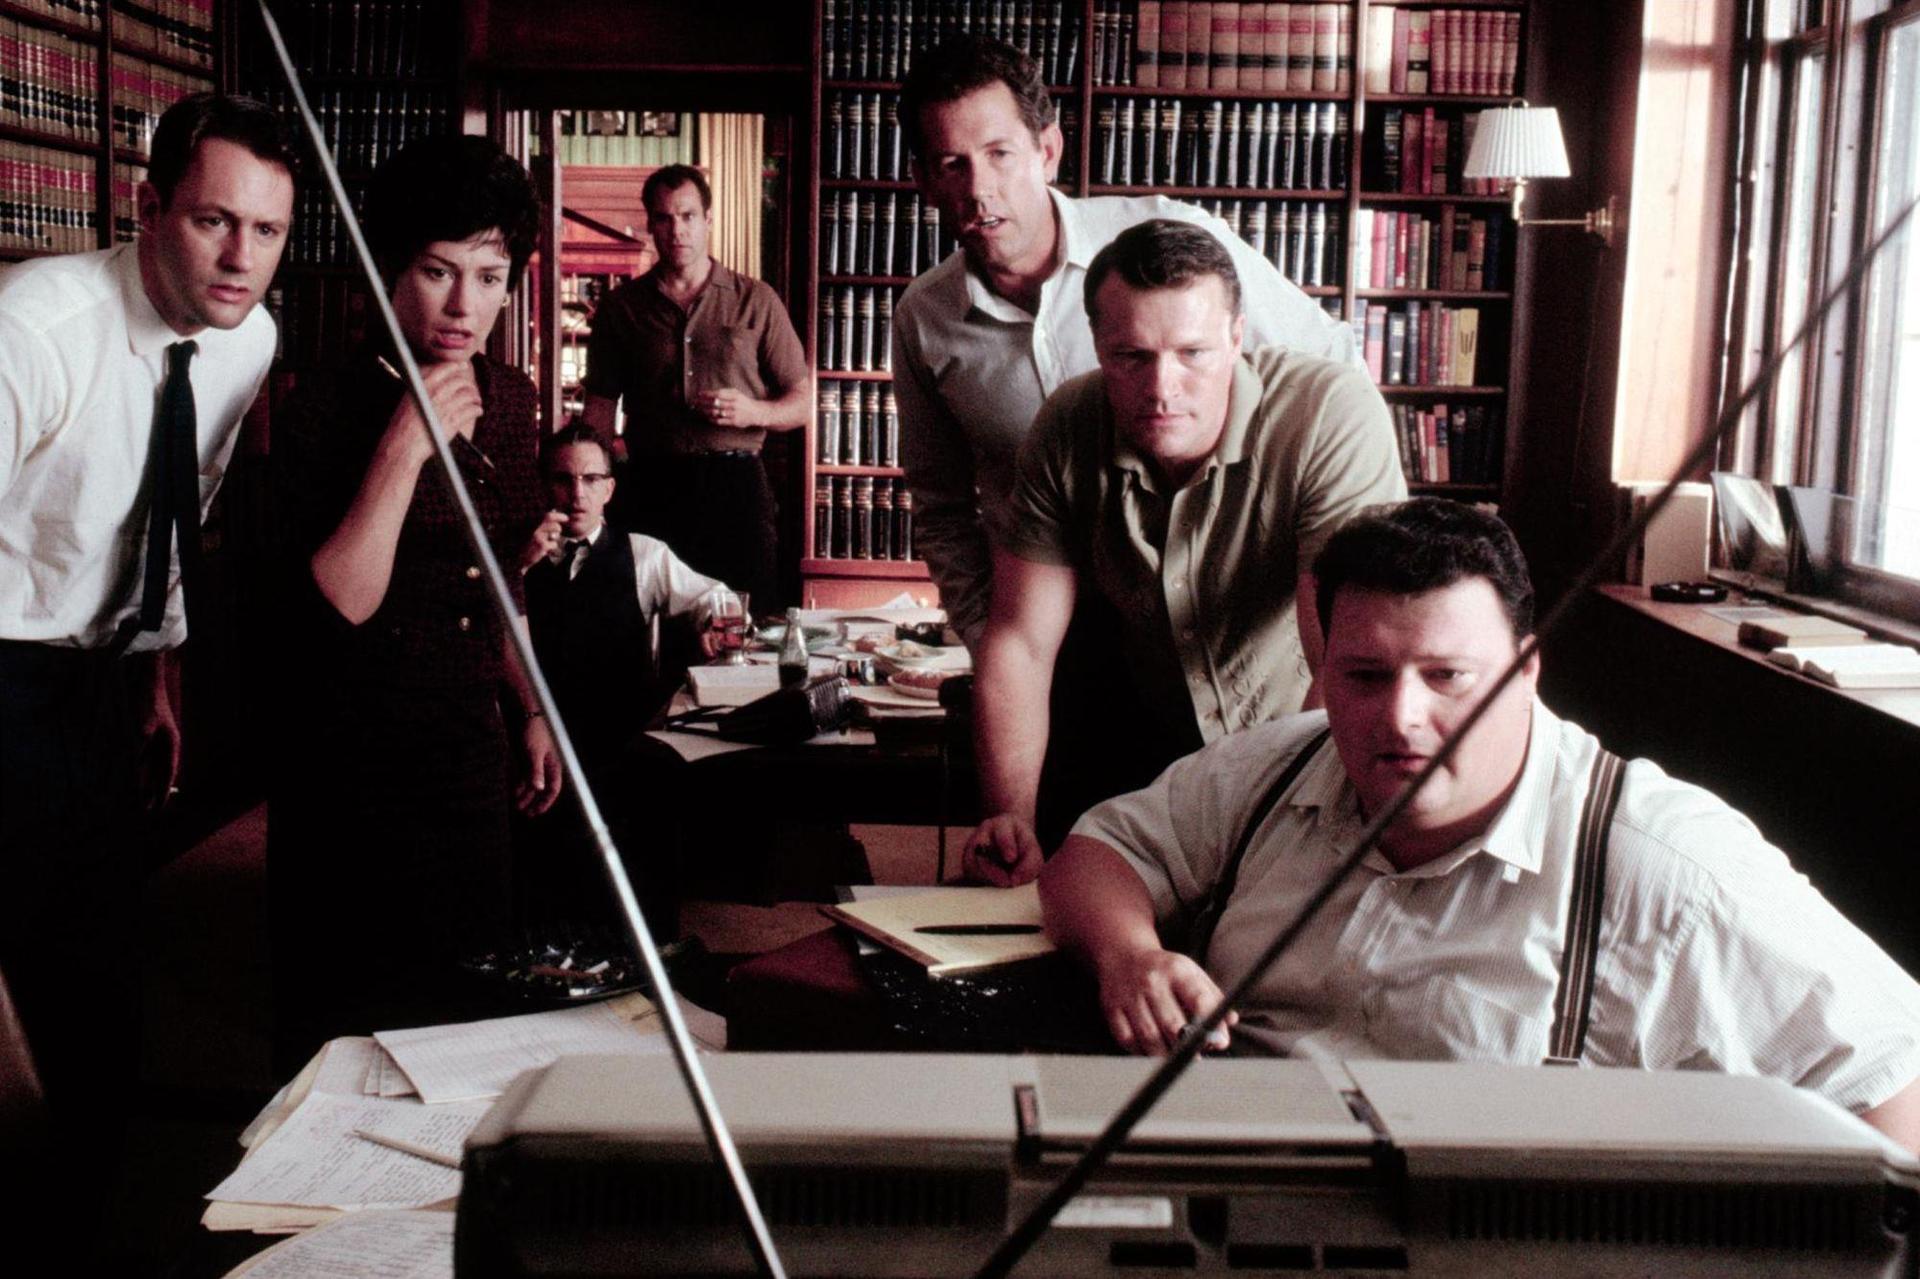 still of kevin costner wayne knight laurie metcalf michael rooker and jay o. sanders in jfk 1991 large picture